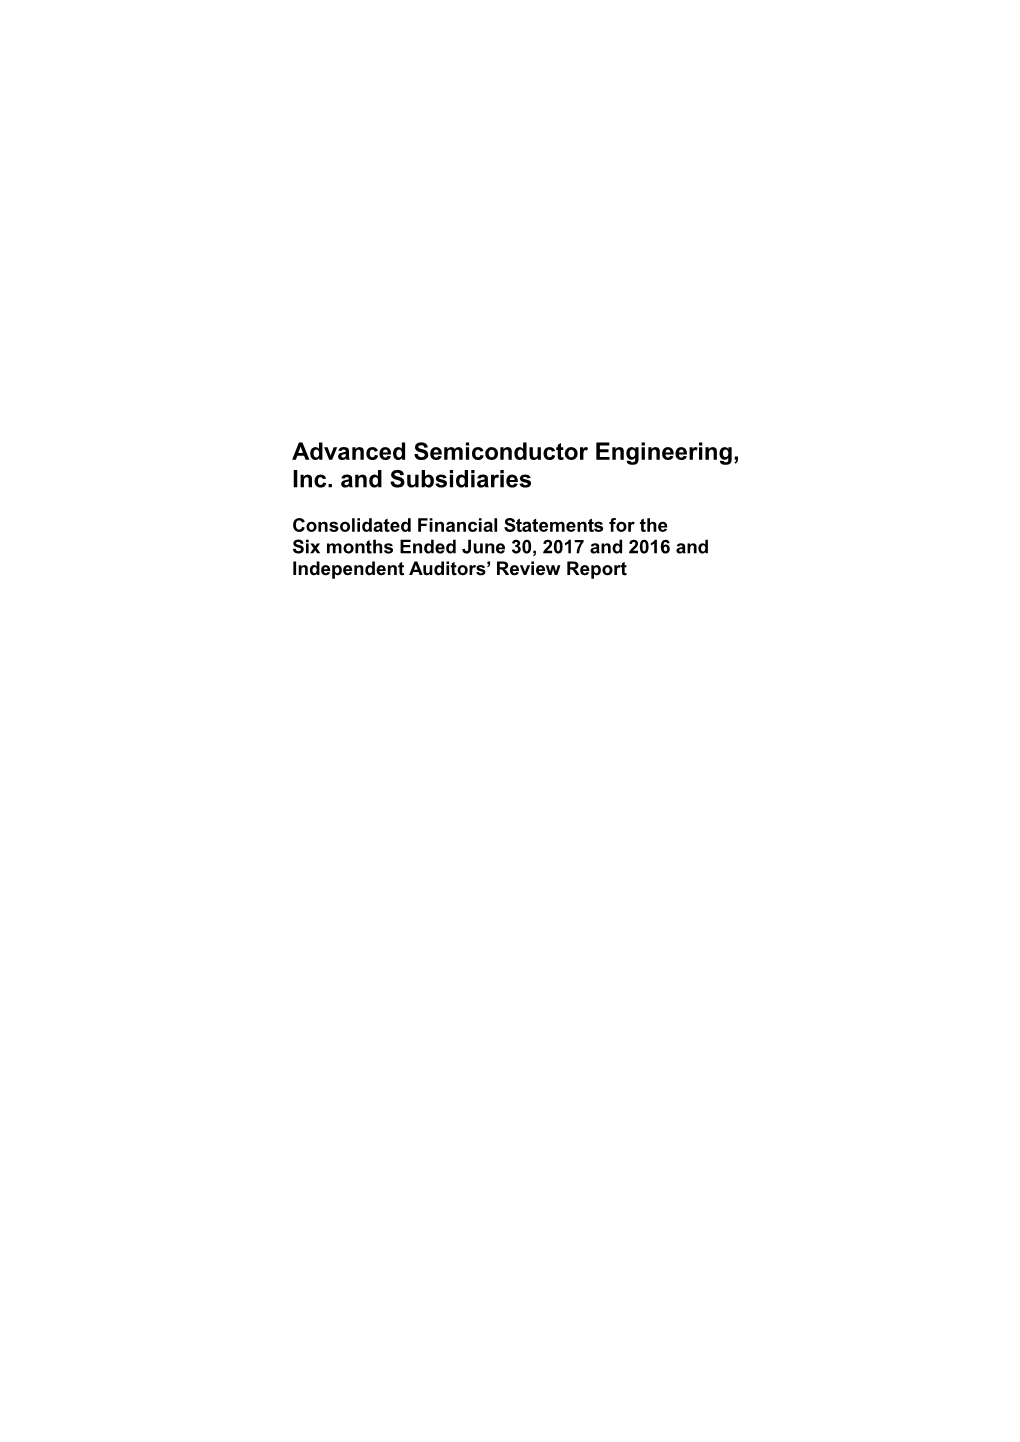 Advanced Semiconductor Engineering, Inc. and Subsidiaries